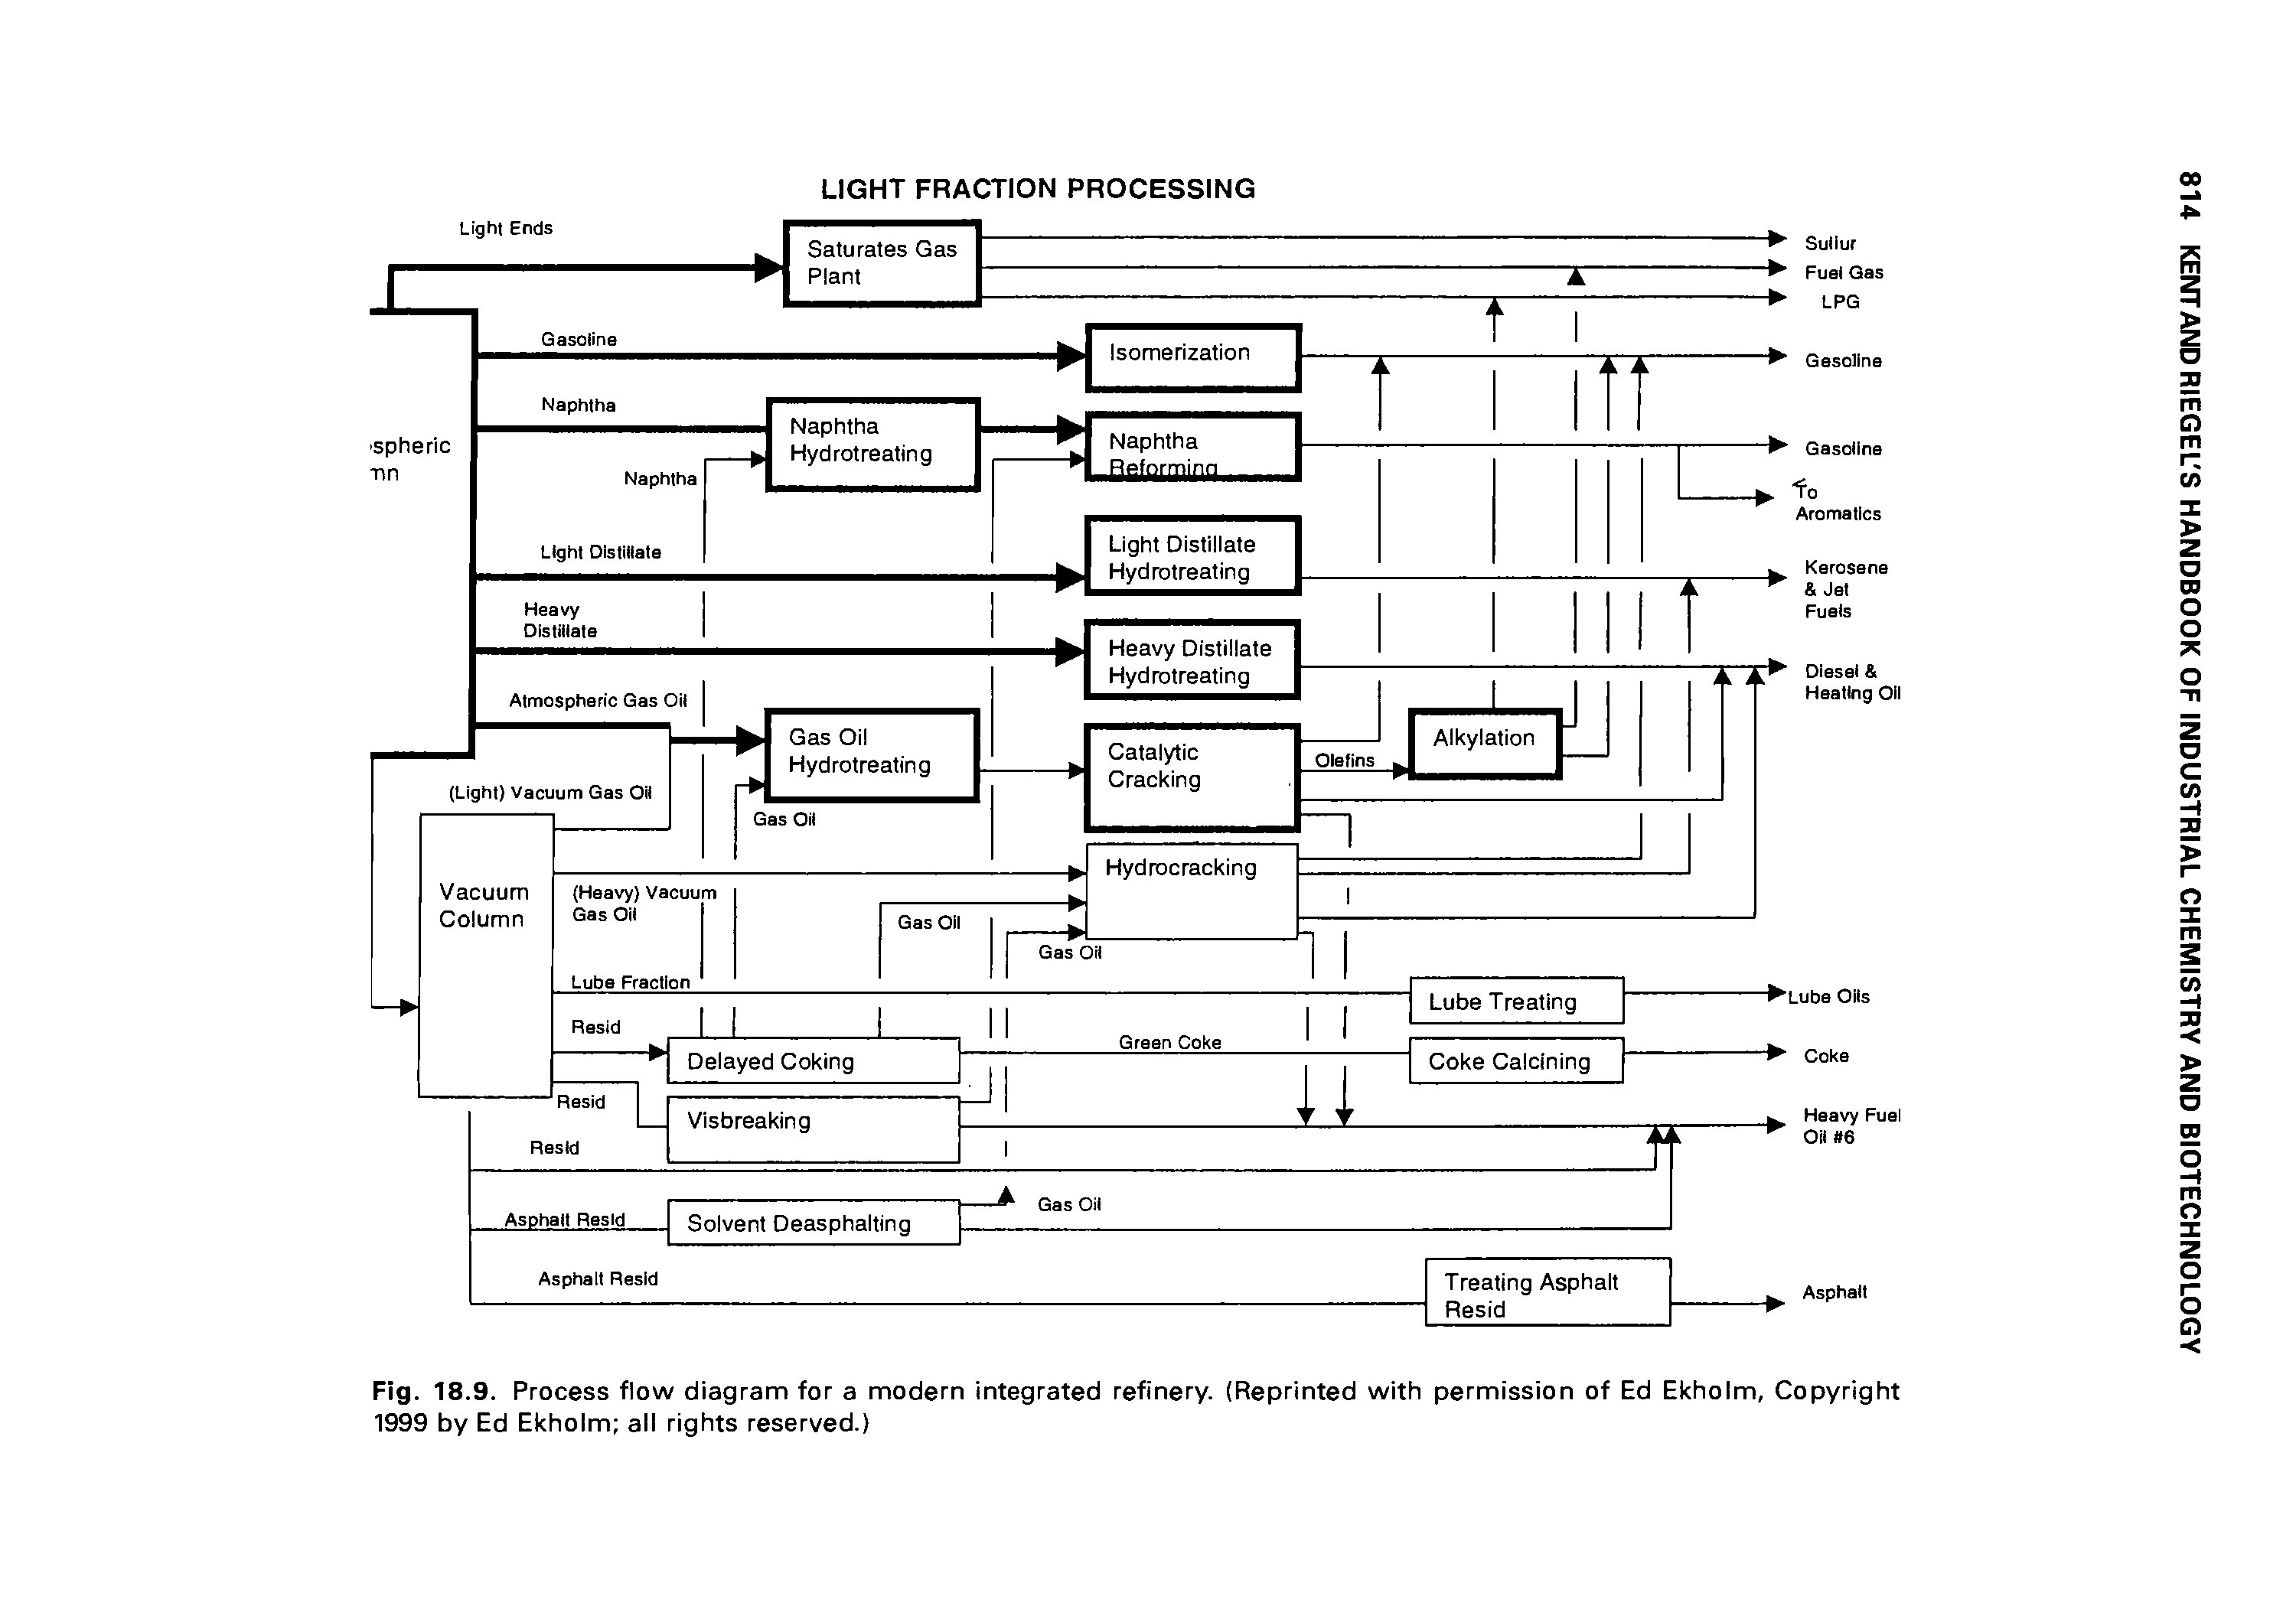 Fig. 18.9. Process flow diagram for a modern integrated refinery. (Reprinted with permission of Ed Ekholm, Copyright 1999 by Ed Ekholm all rights reserved.)...